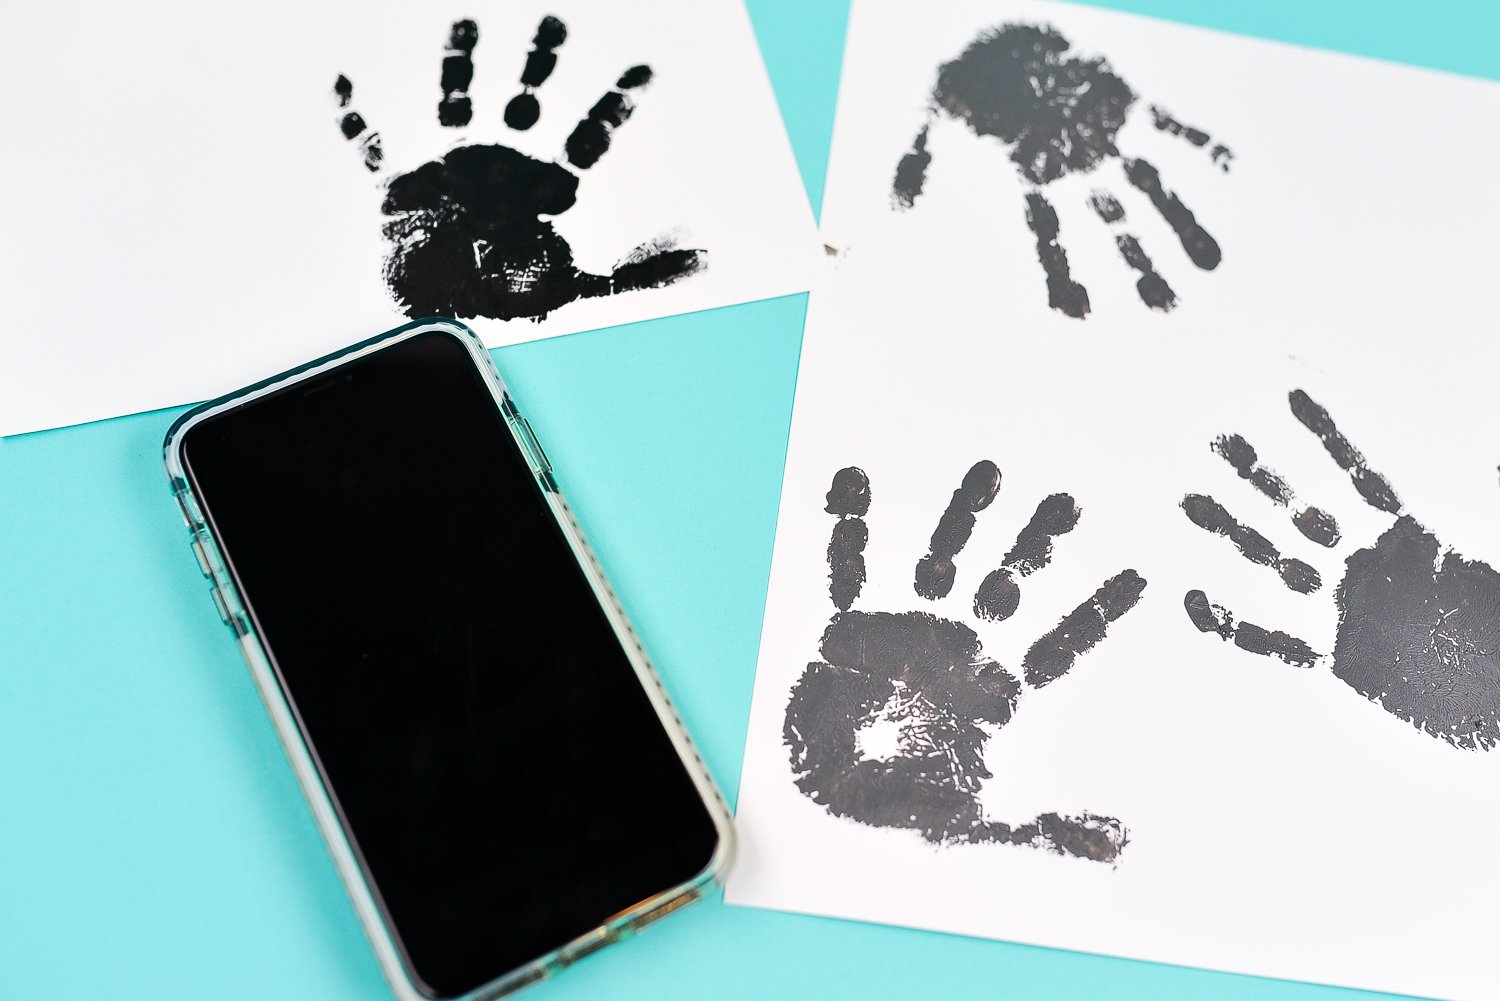 Take a photo of the handprints using your mobile phone.